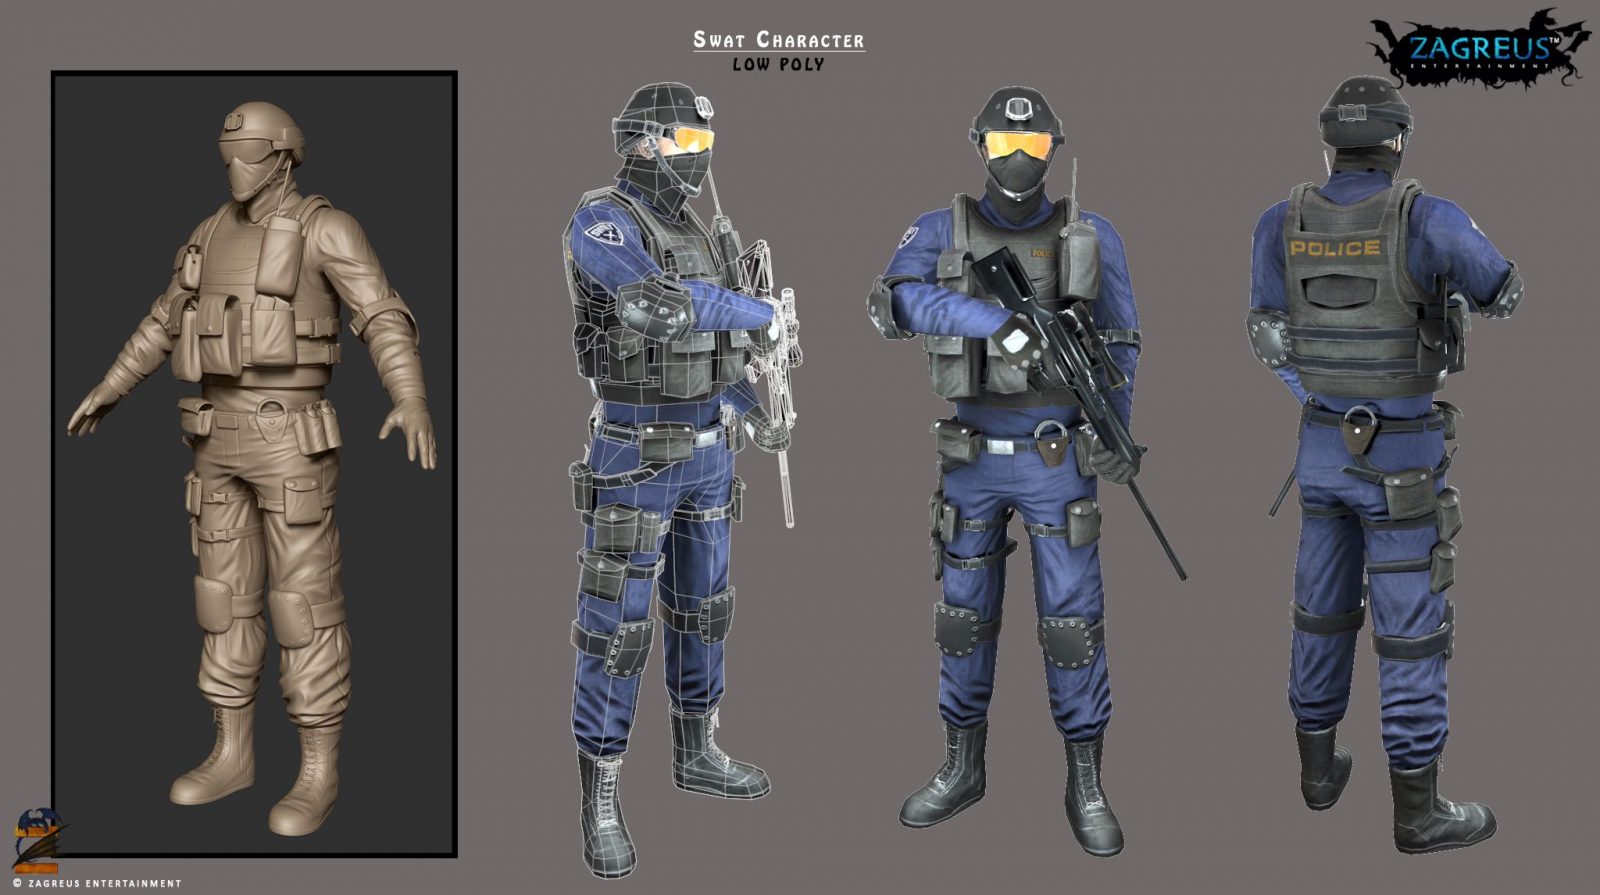 SWAT-Character-Low-Poly_ZE.jpg